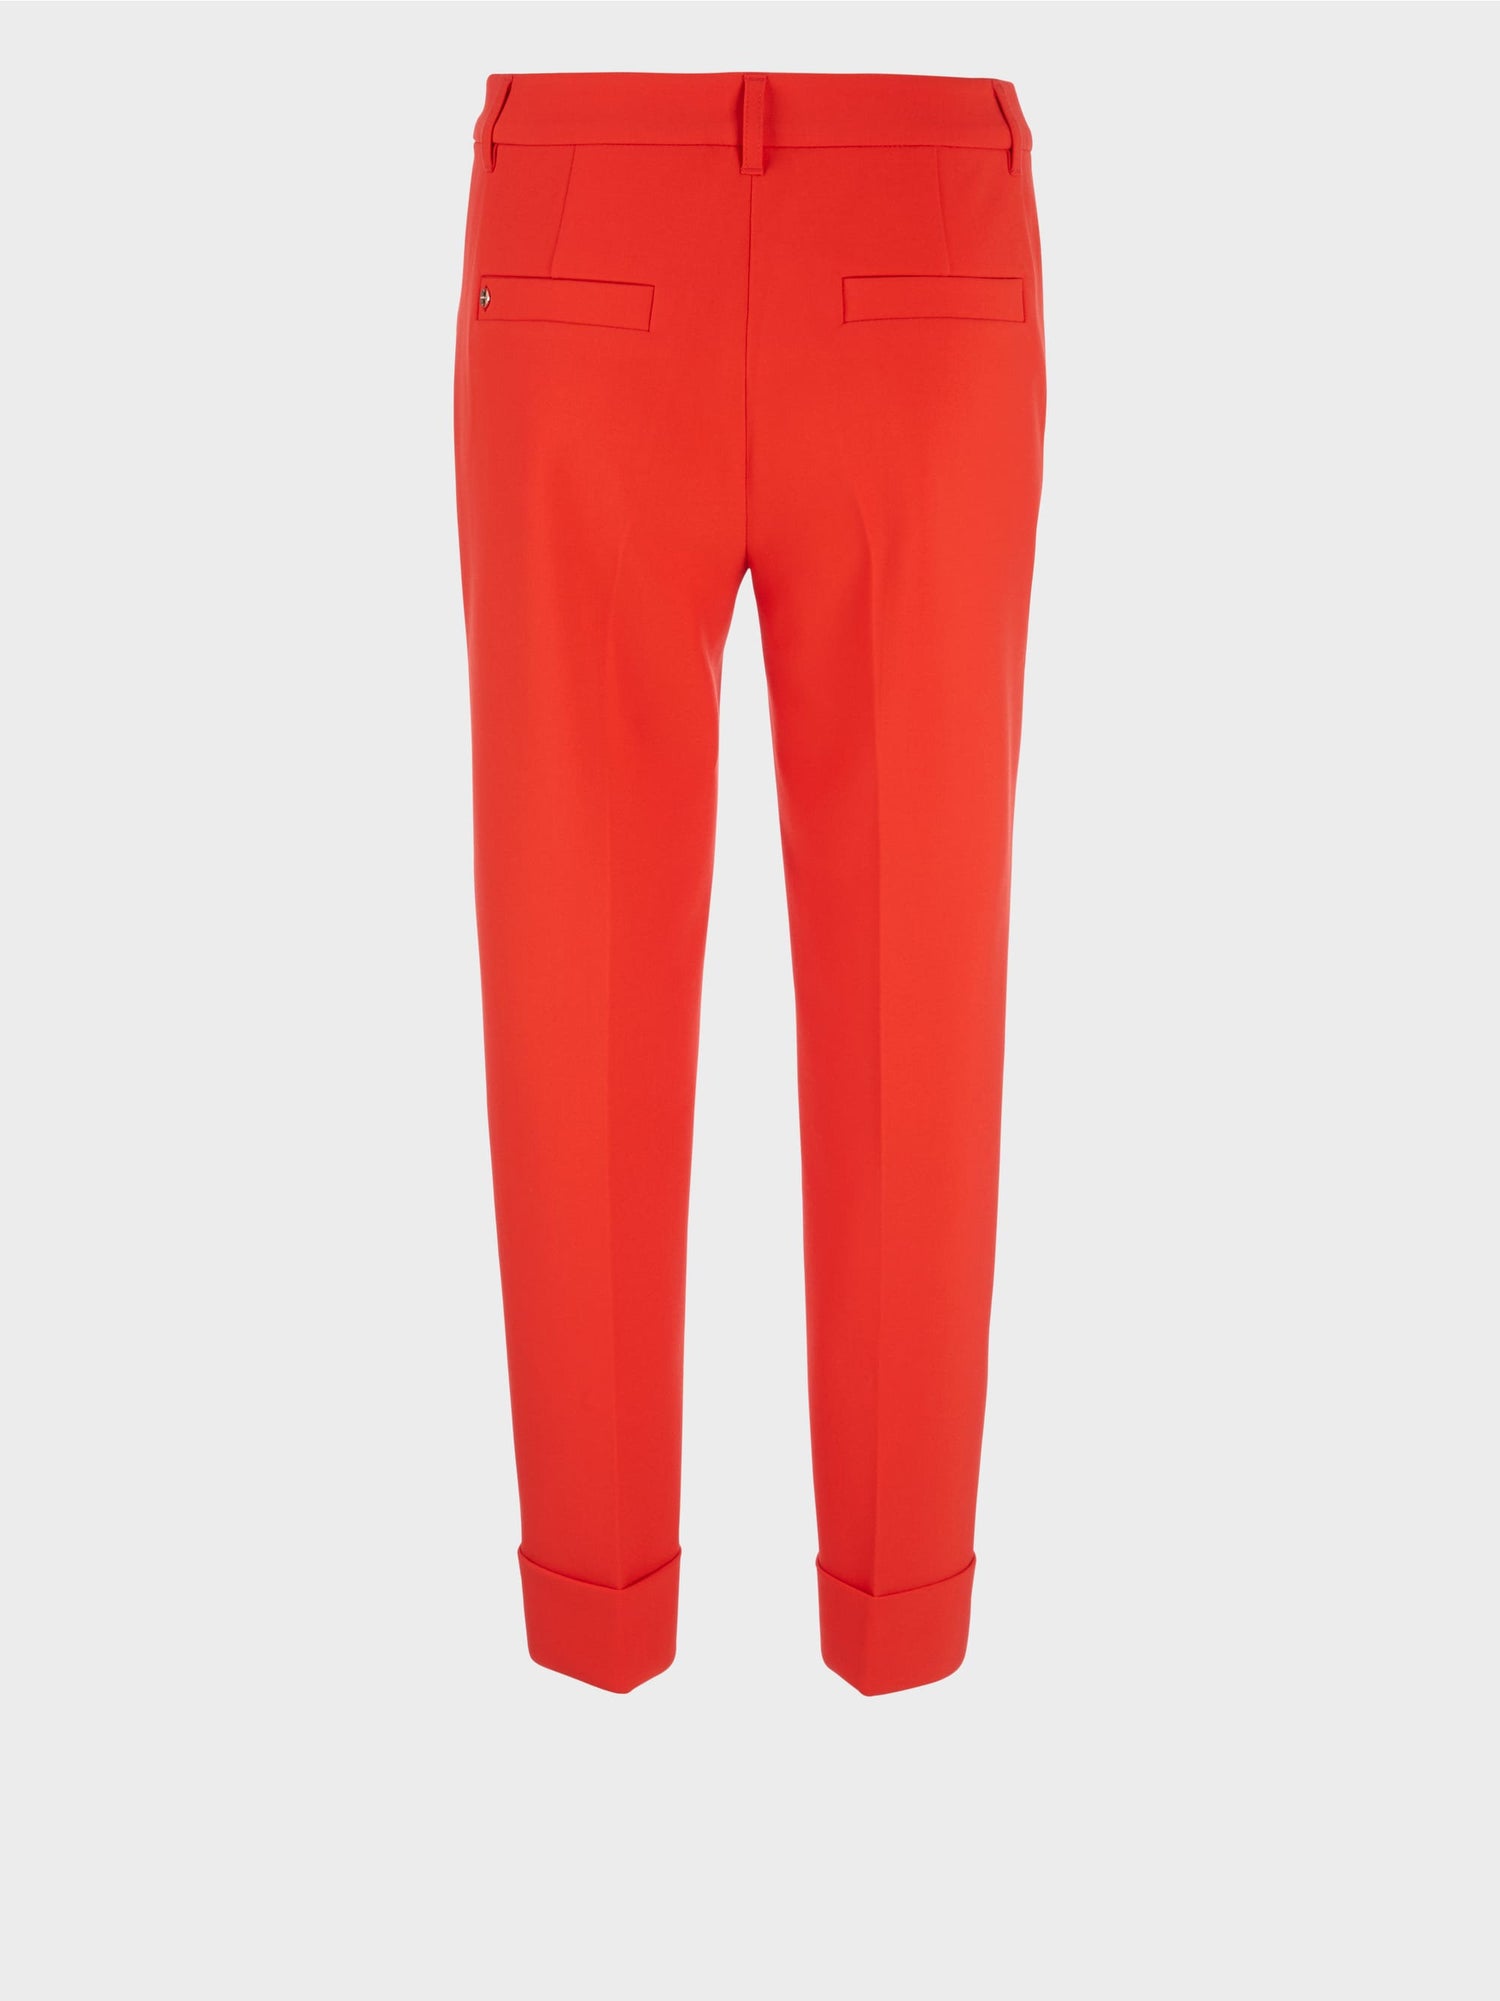 Fordon Pants With Pleat And Cuffs_WC 81.13 W22_223_08